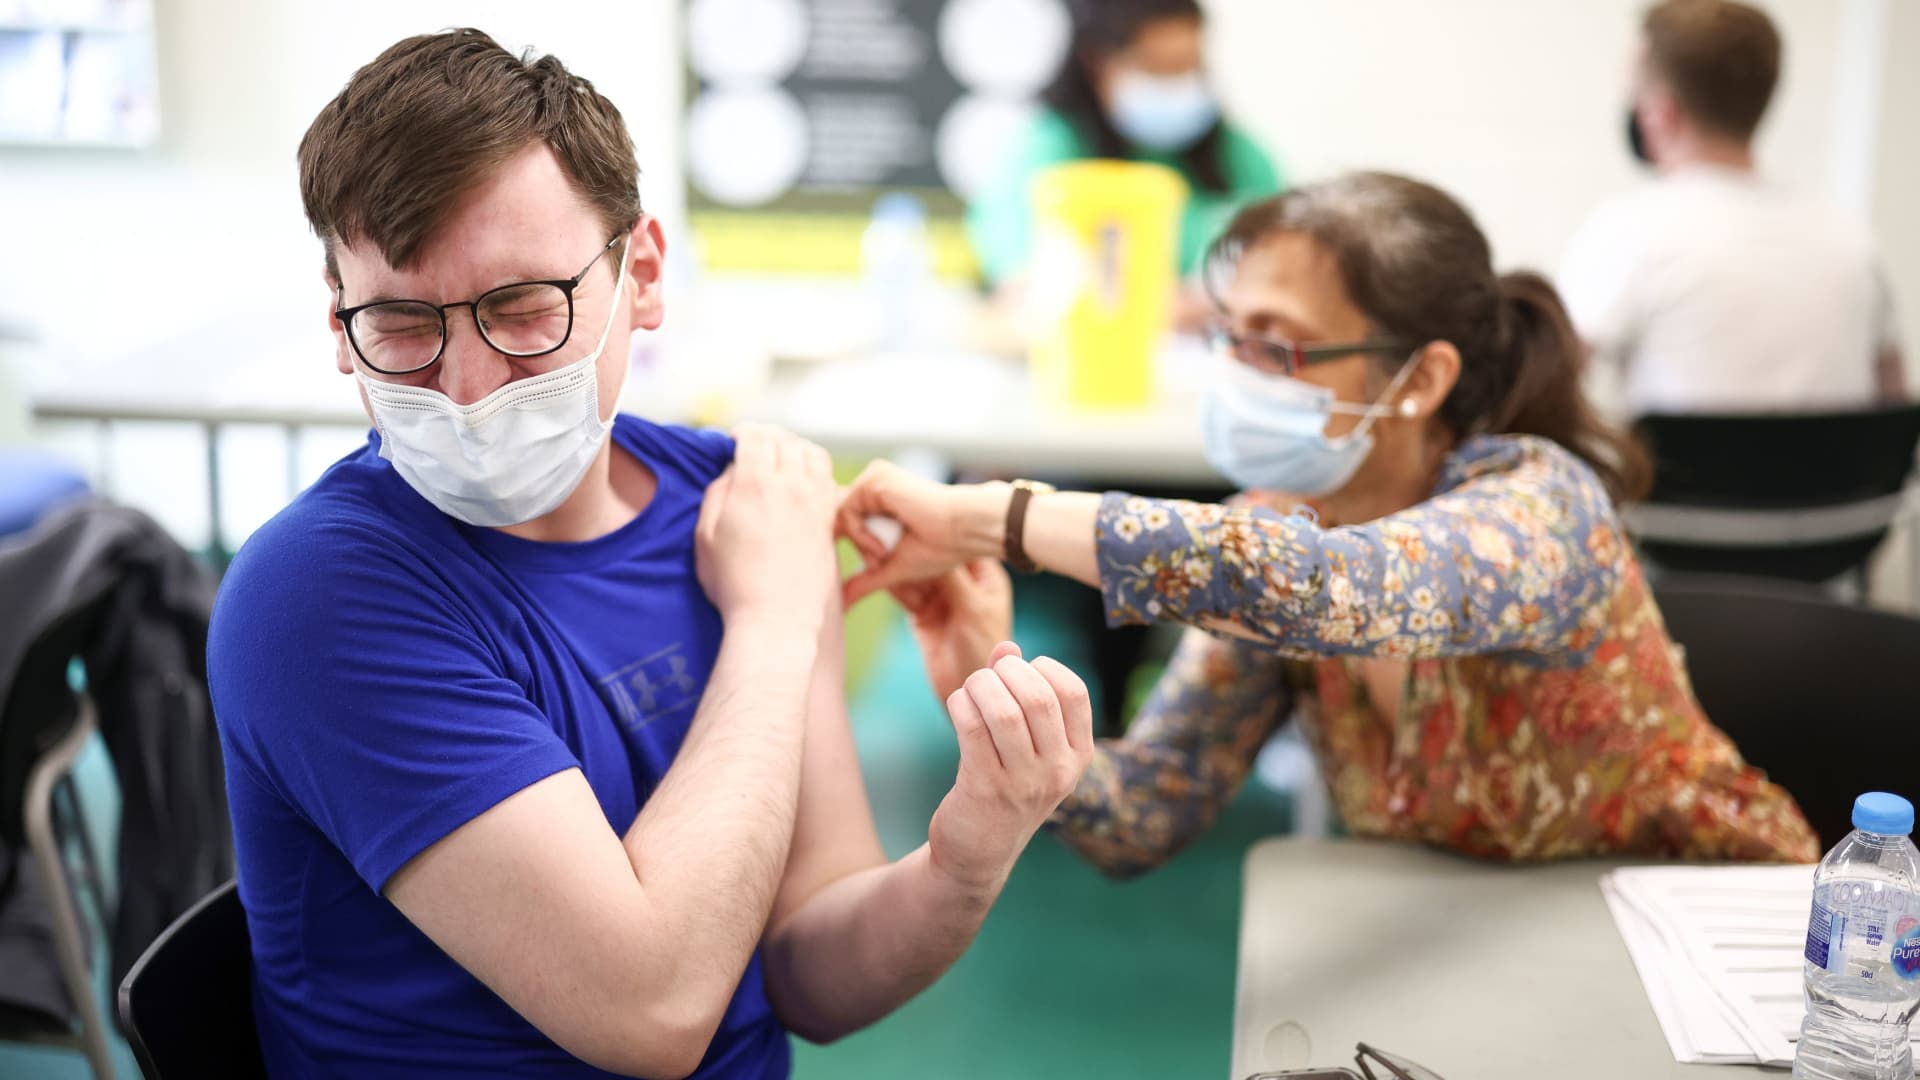 A person receives a dose of the Pfizer BioNTech vaccine at a vaccination centre for those aged over 18 years old at the Belmont Health Centre in Harrow, amid the coronavirus disease (COVID-19) outbreak in London, Britain, June 6, 2021.